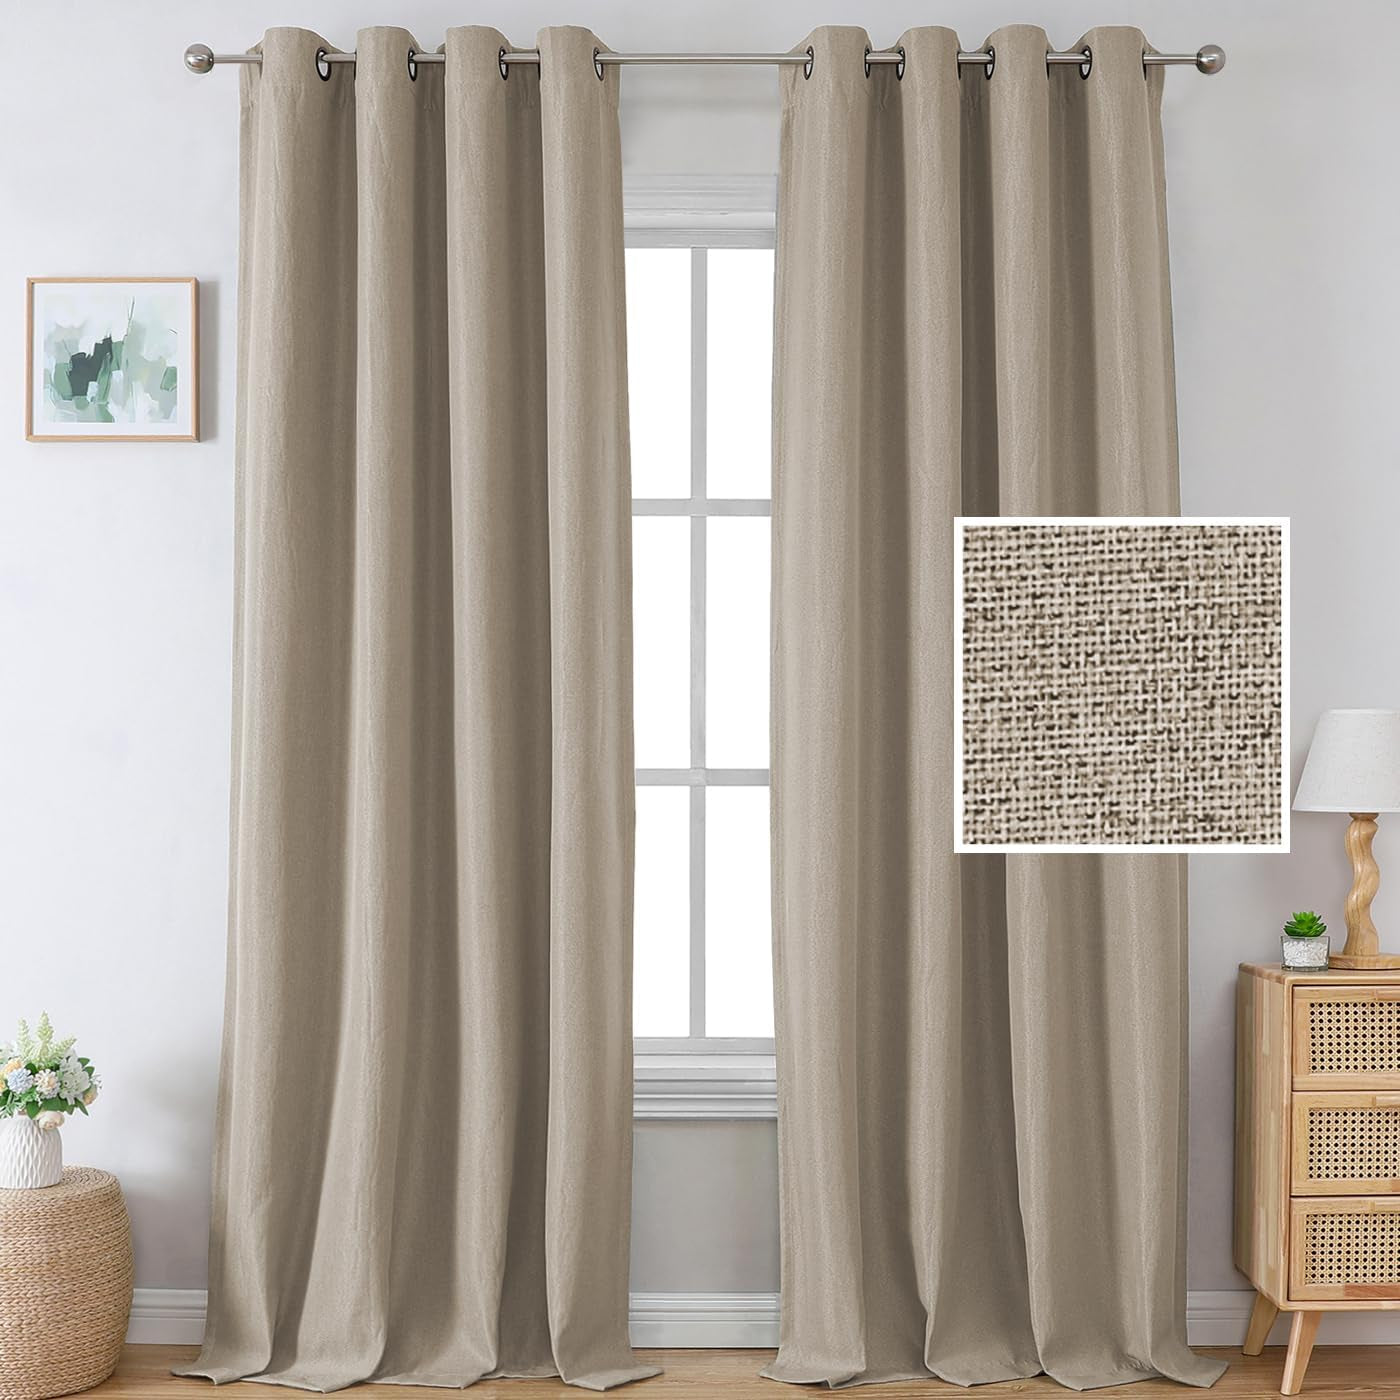 H.VERSAILTEX Linen Blackout Curtains 84 Inches Long Thermal Insulated Room Darkening Linen Curtains for Bedroom Textured Burlap Grommet Window Curtains for Living Room, Bluestone and Taupe, 2 Panels  H.VERSAILTEX Light Taupe 52"W X 96"L 